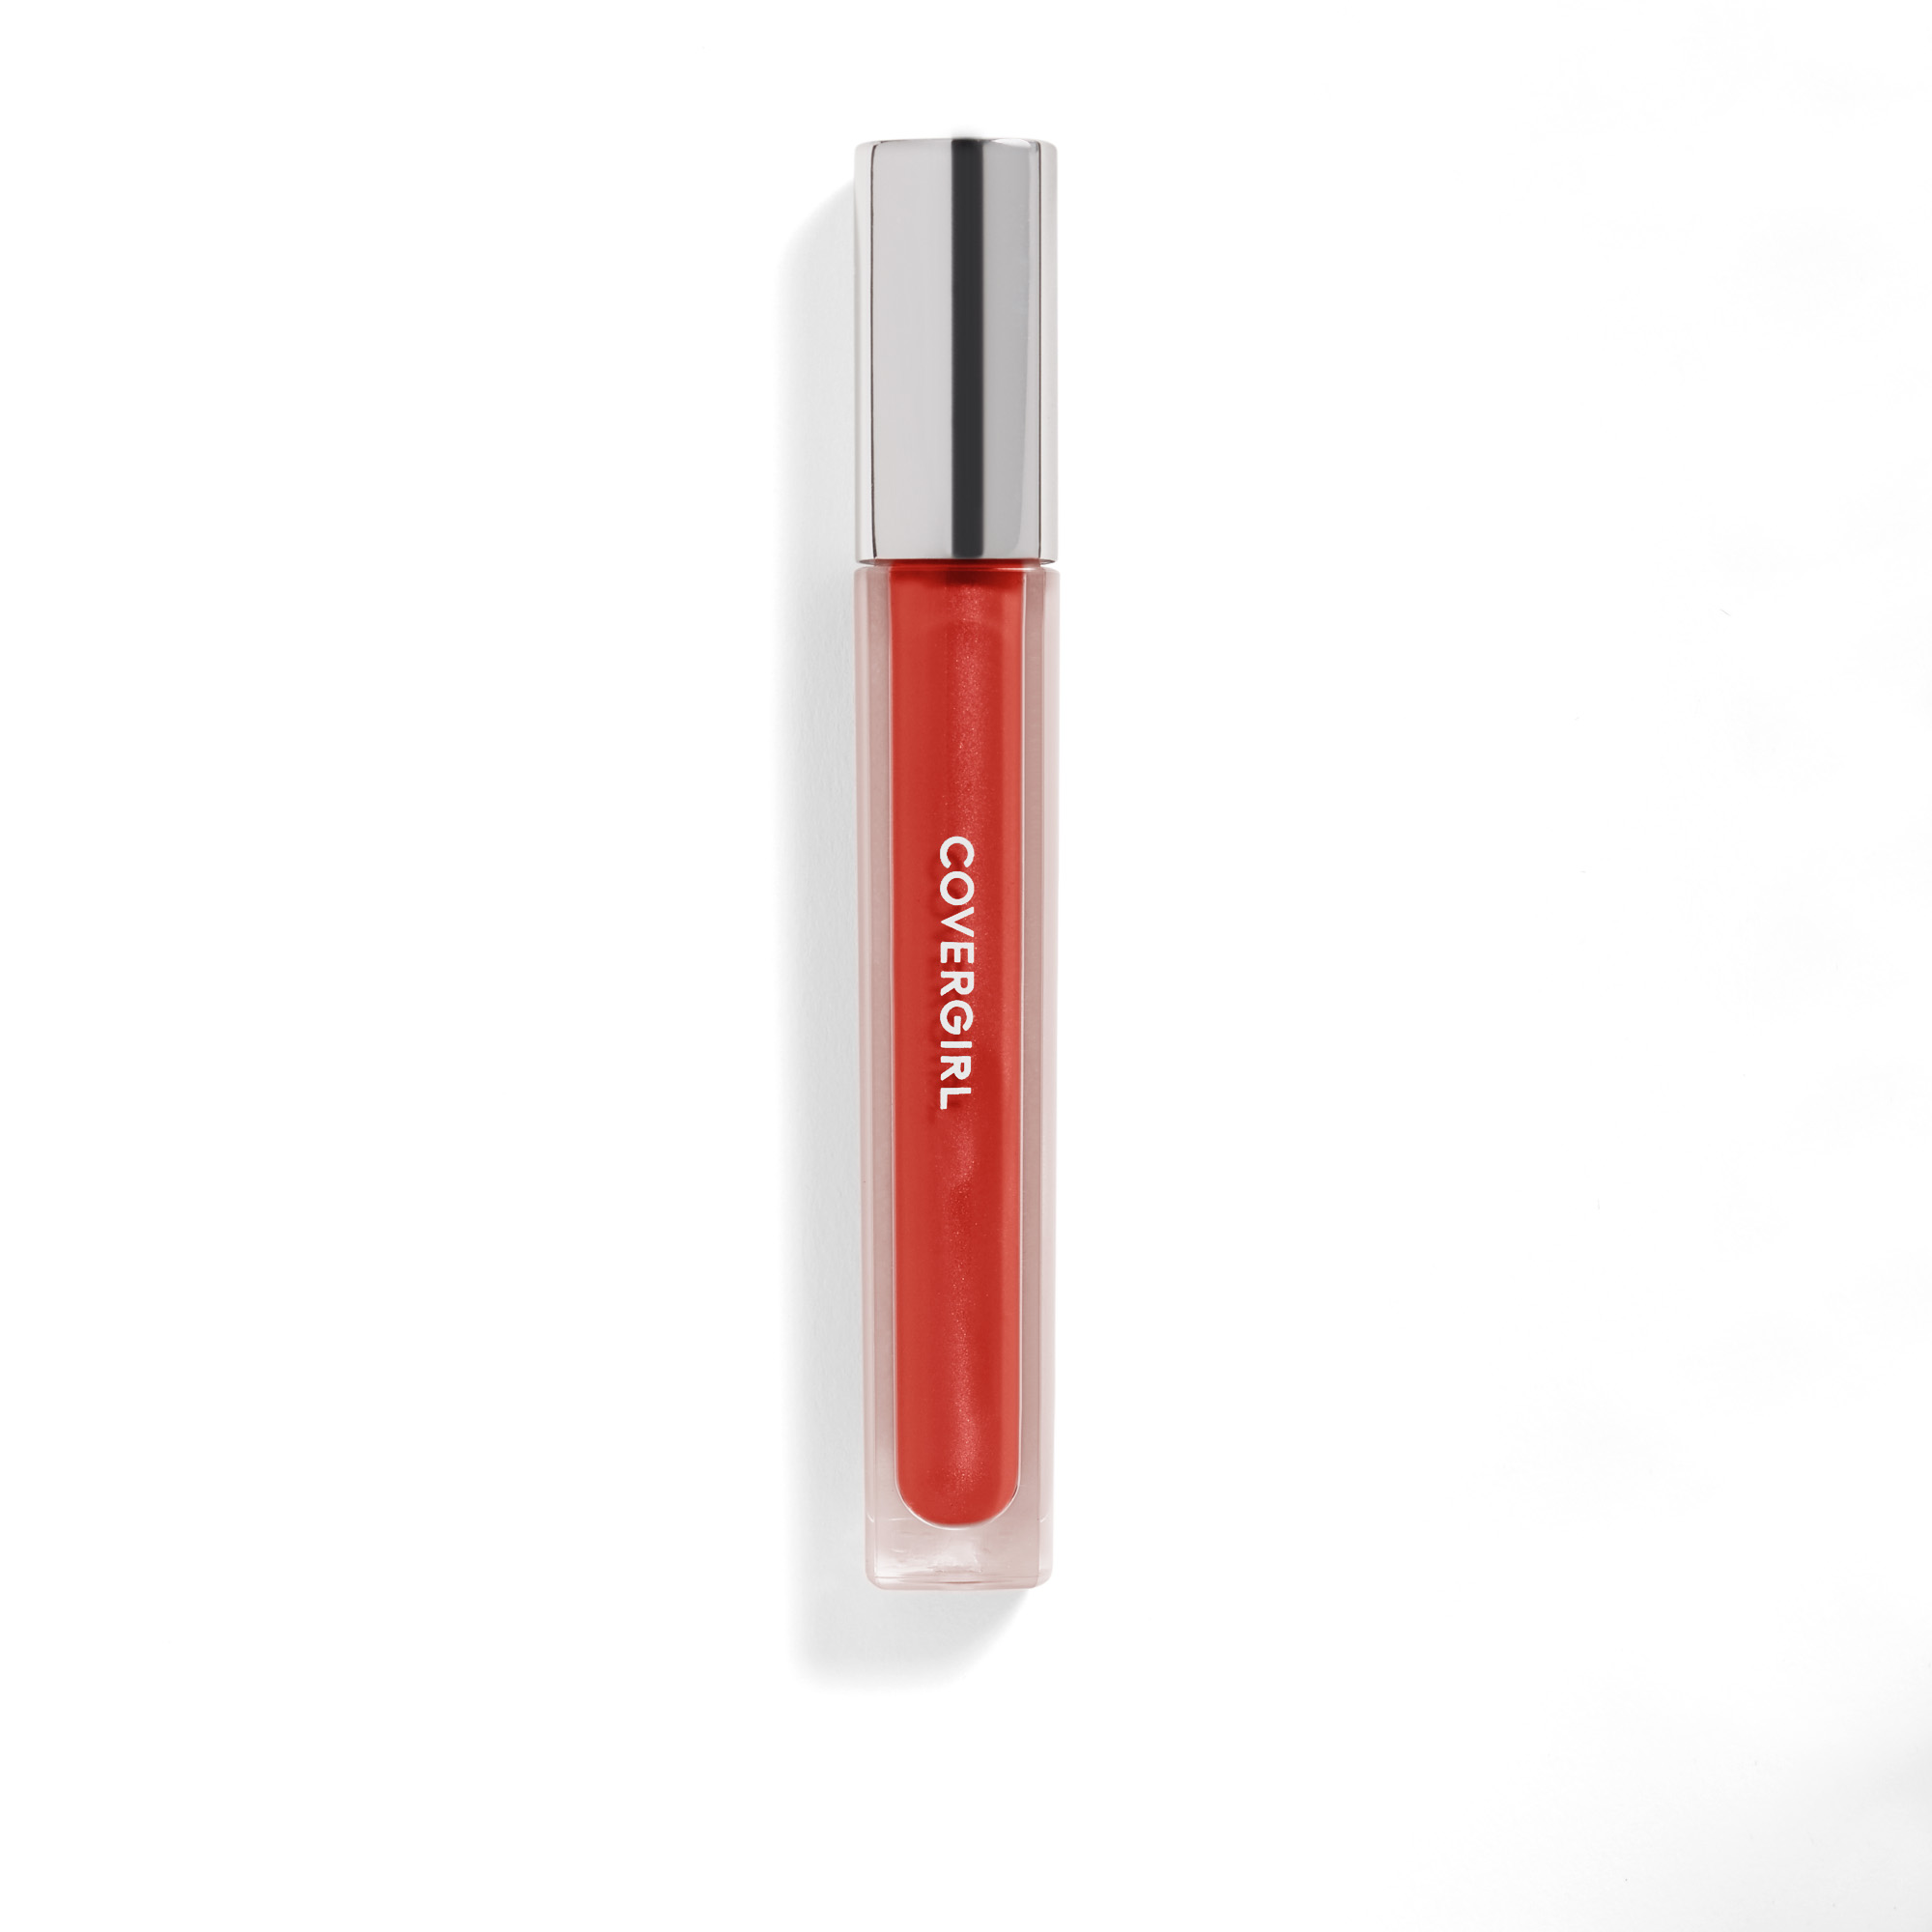 COVERGIRL Colorlicious High Shine Lip Gloss, 670 Succulent Citrus - image 1 of 5